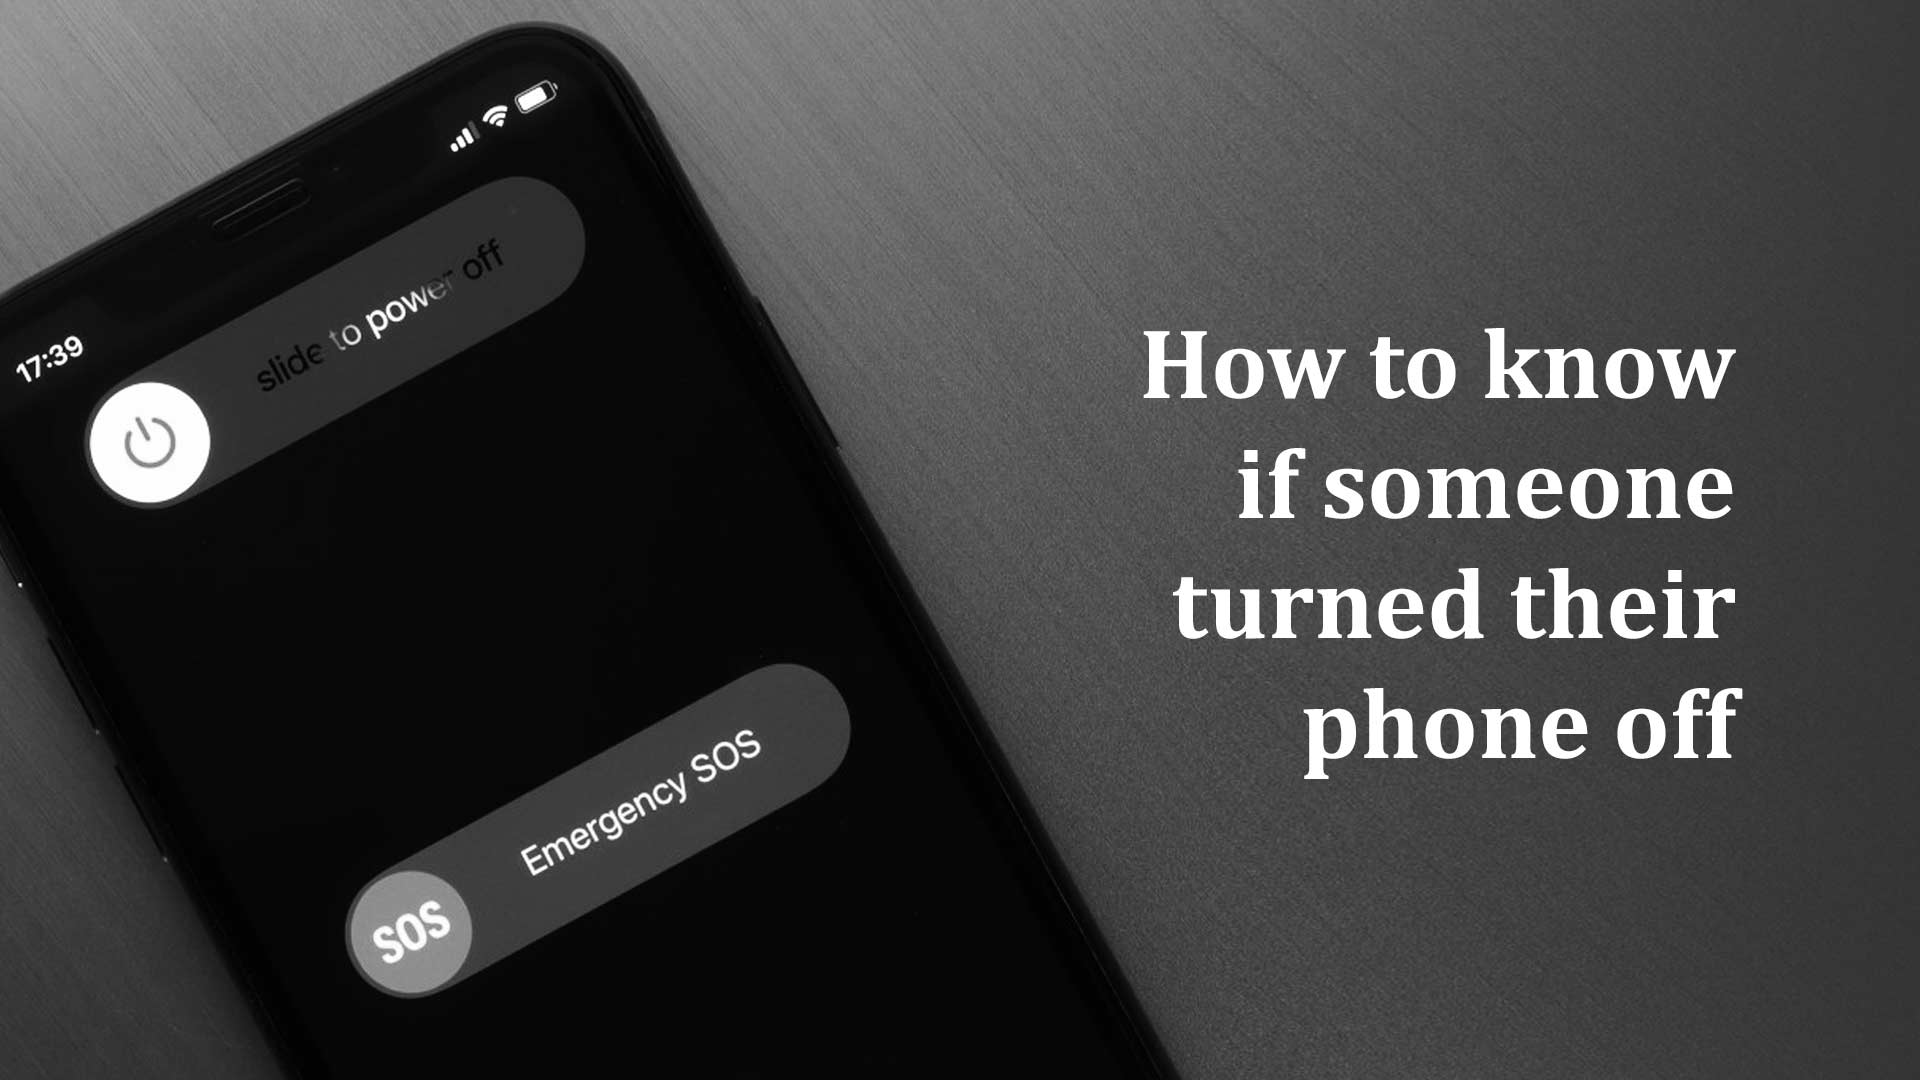 How to know if someone turned their phone off on iPhone and Android